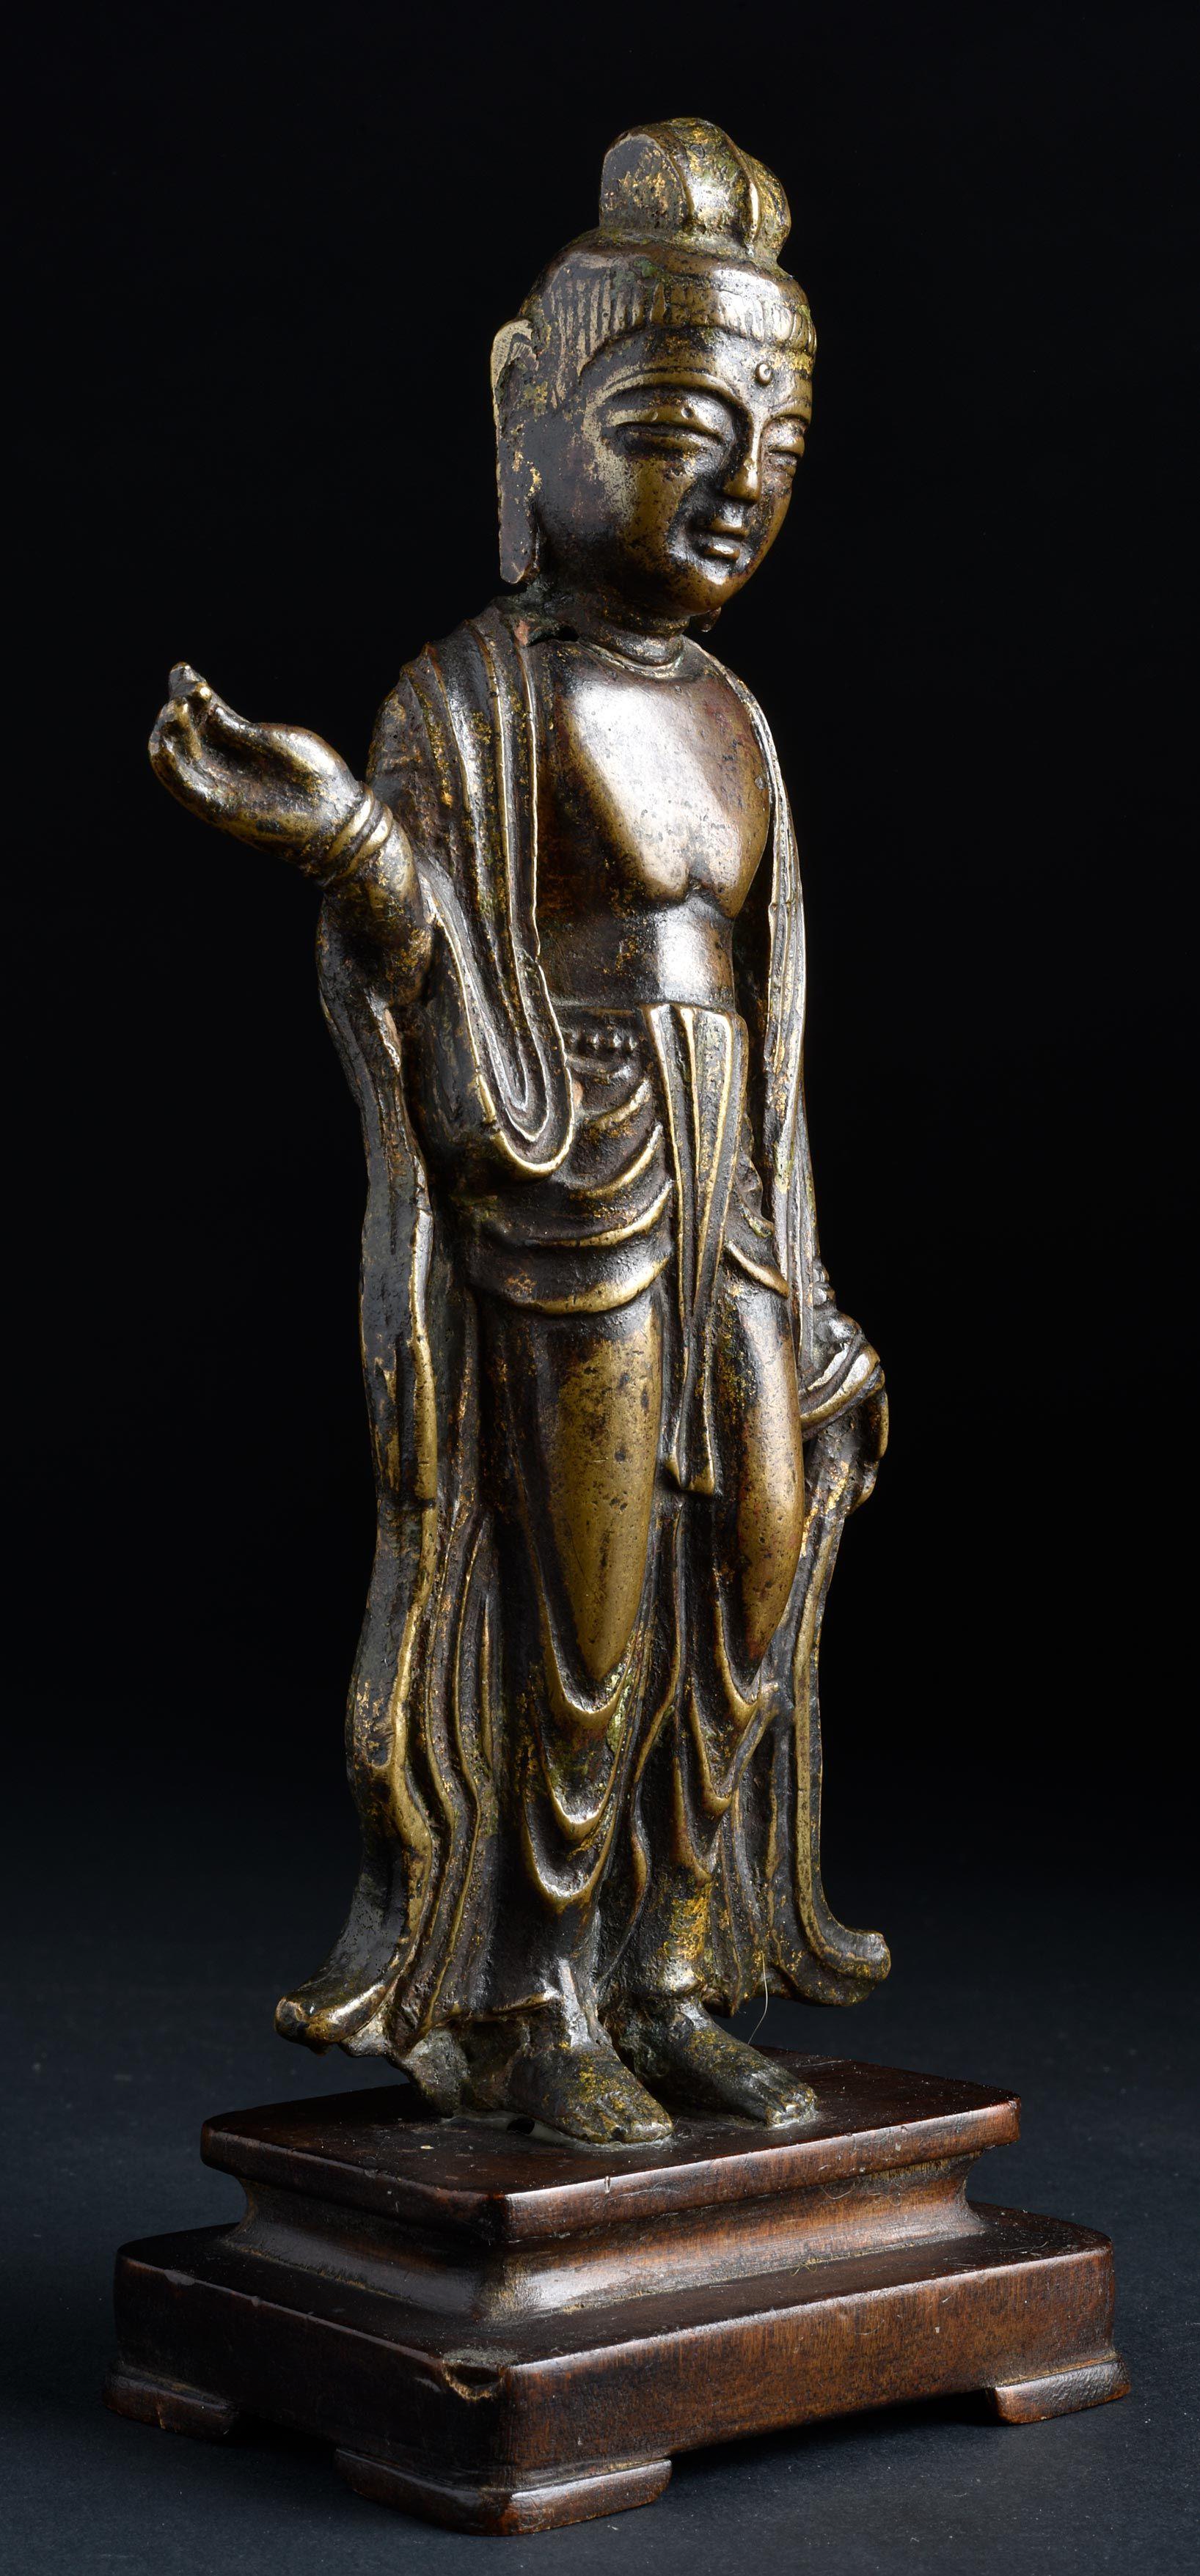 Very special 7/8thC Korean bronze of a Bodhisattva. One of the best in my entire collection. See Sotheby's 